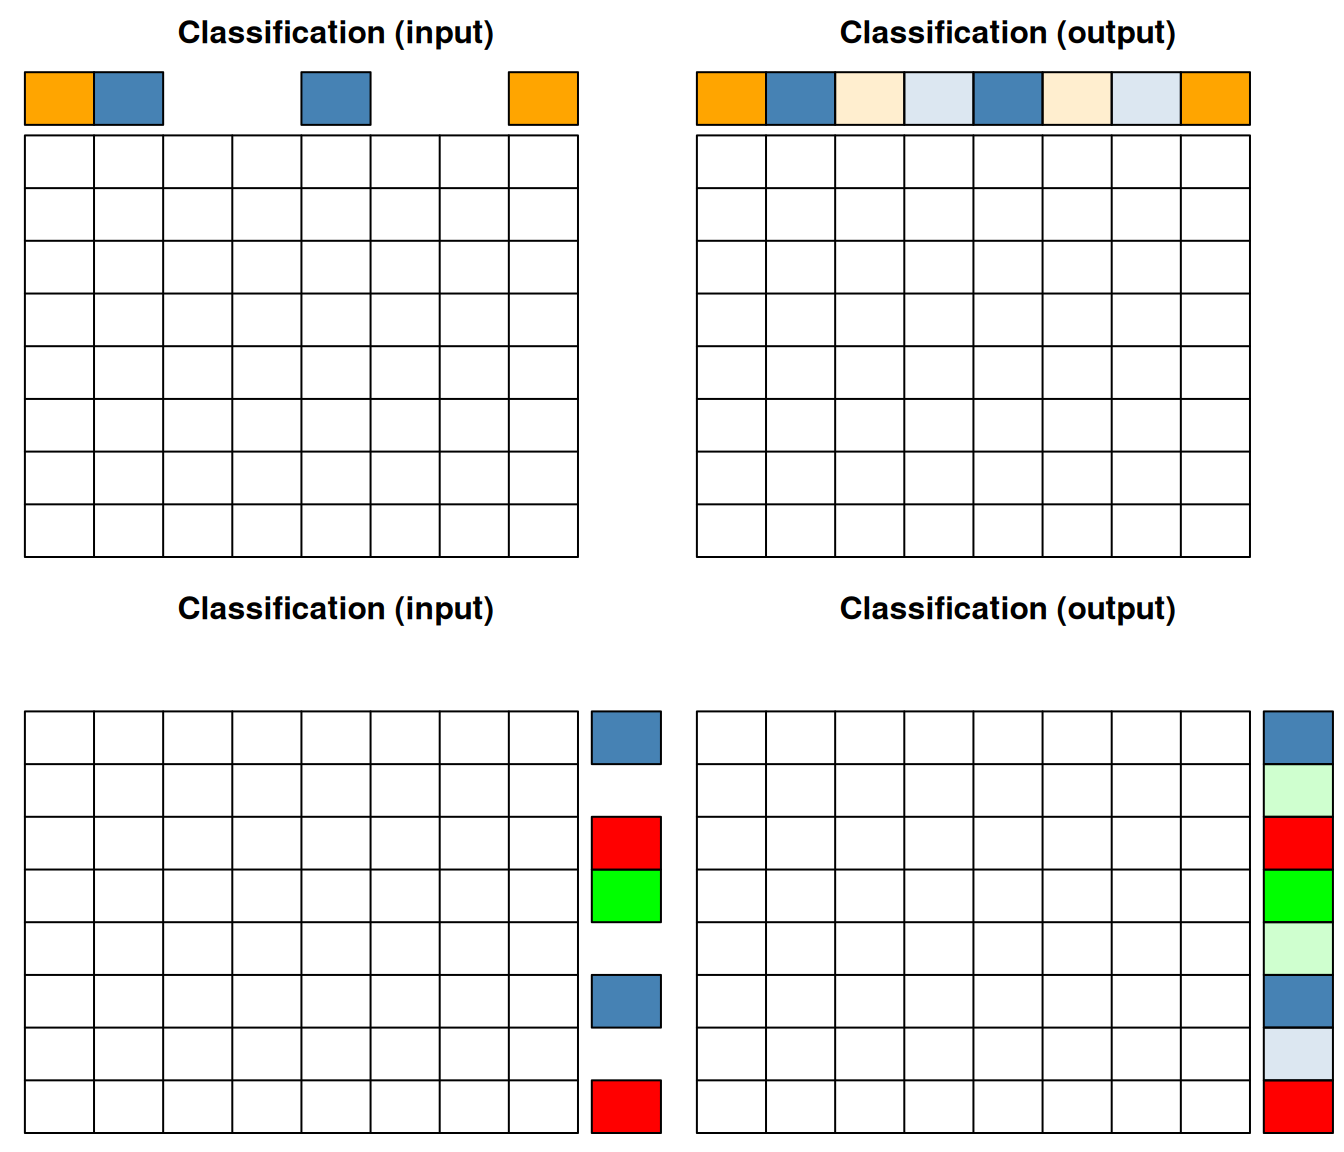 Classification of samples (top) or features (bottom).